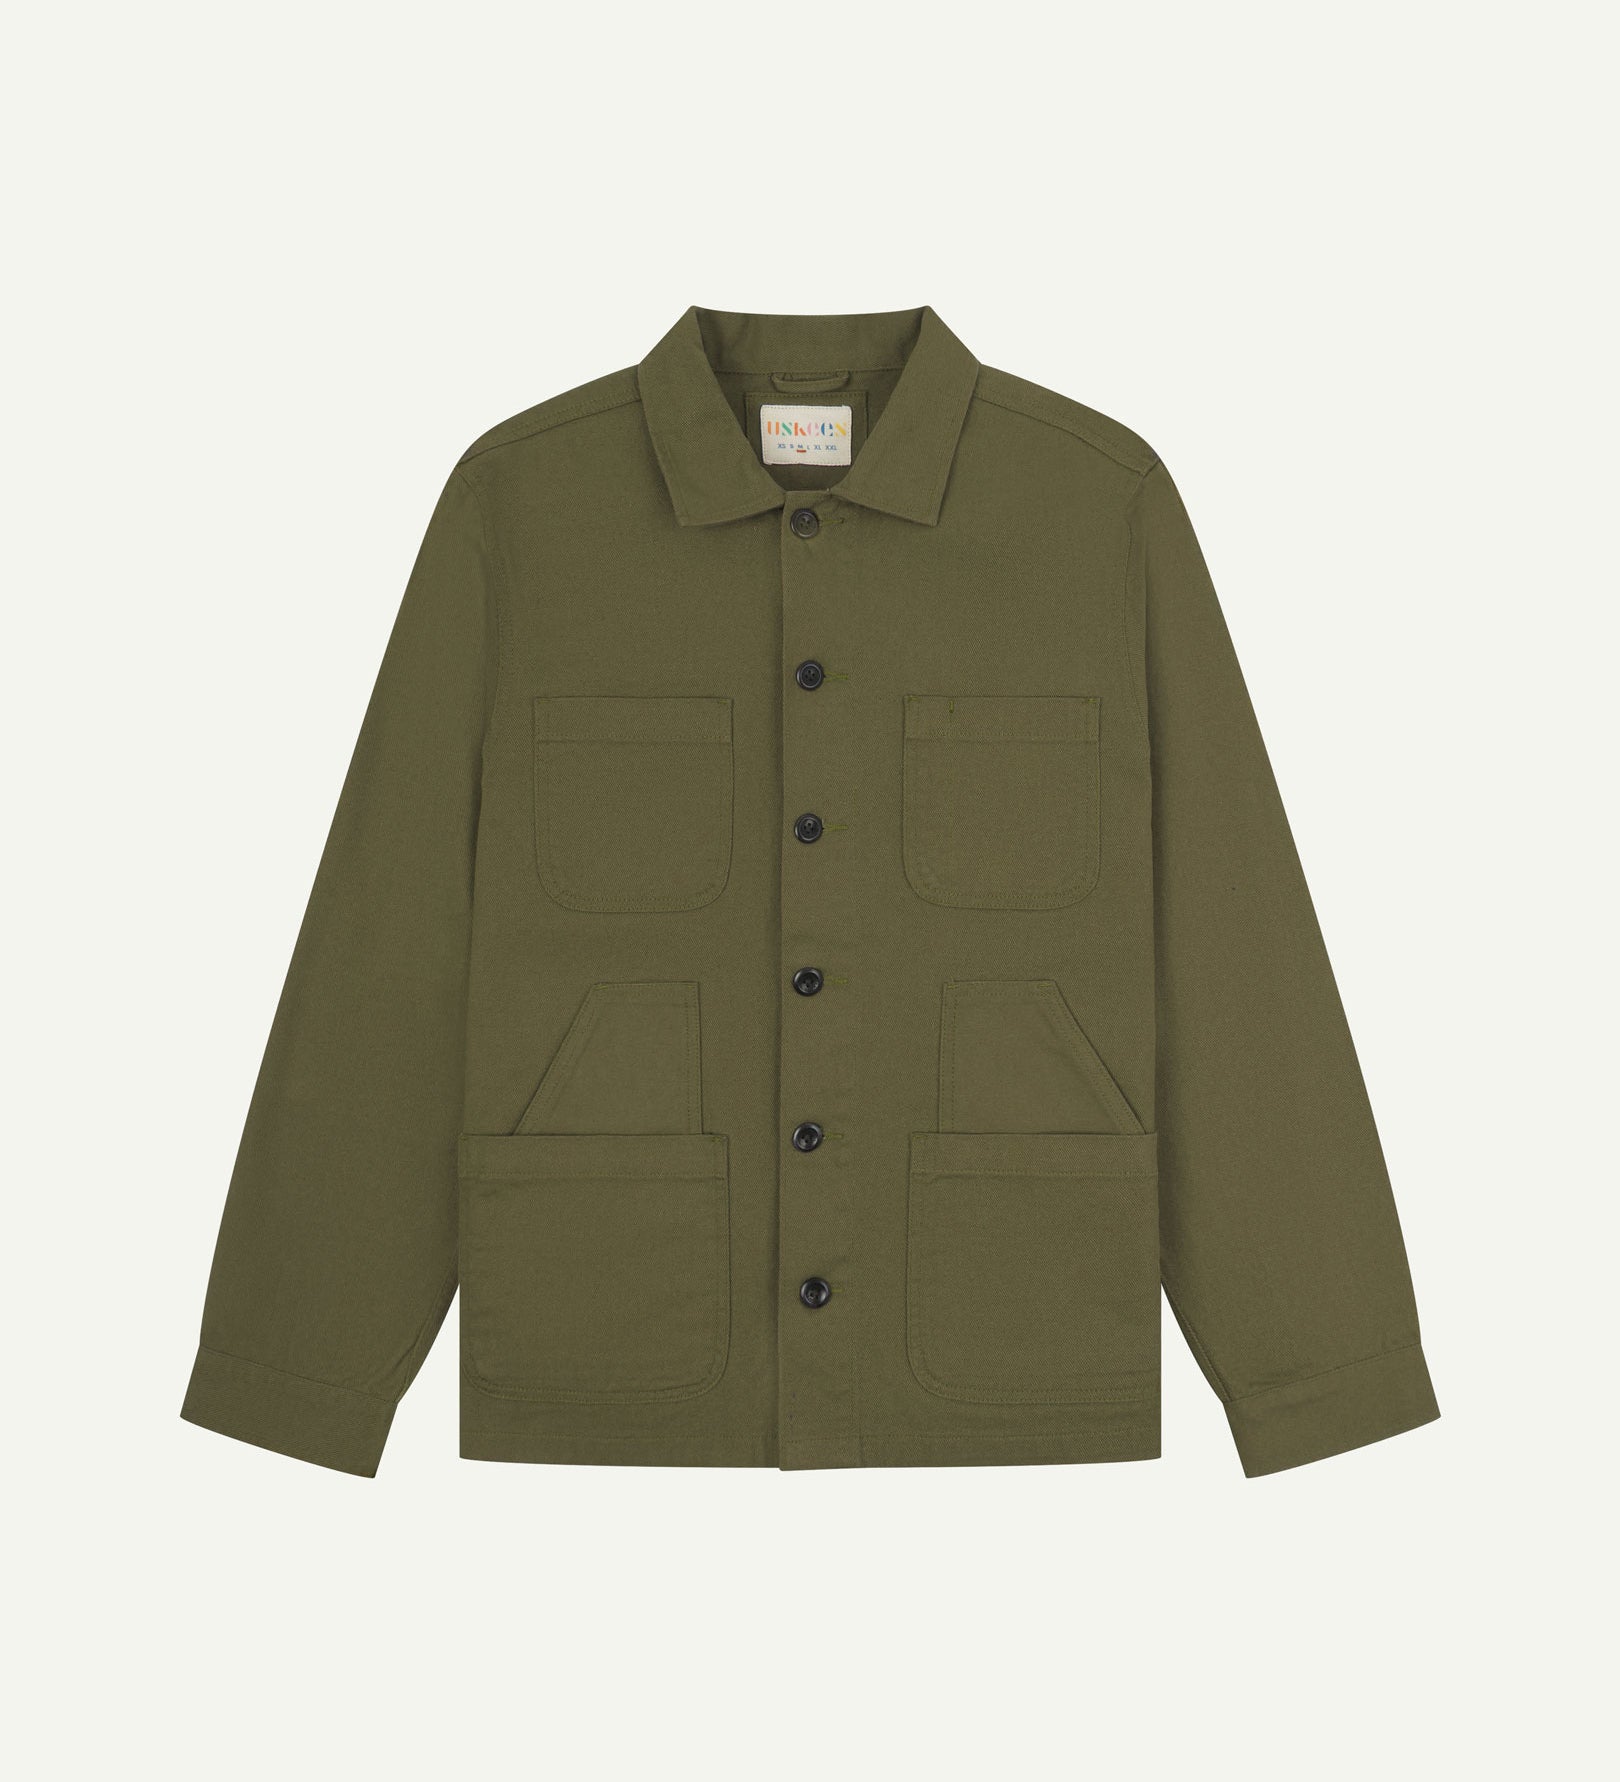 Moss-green buttoned organic cotton-drill overshirt from Uskees with clear view of layered patch pockets, reinforced elbows and Uskees branding label.